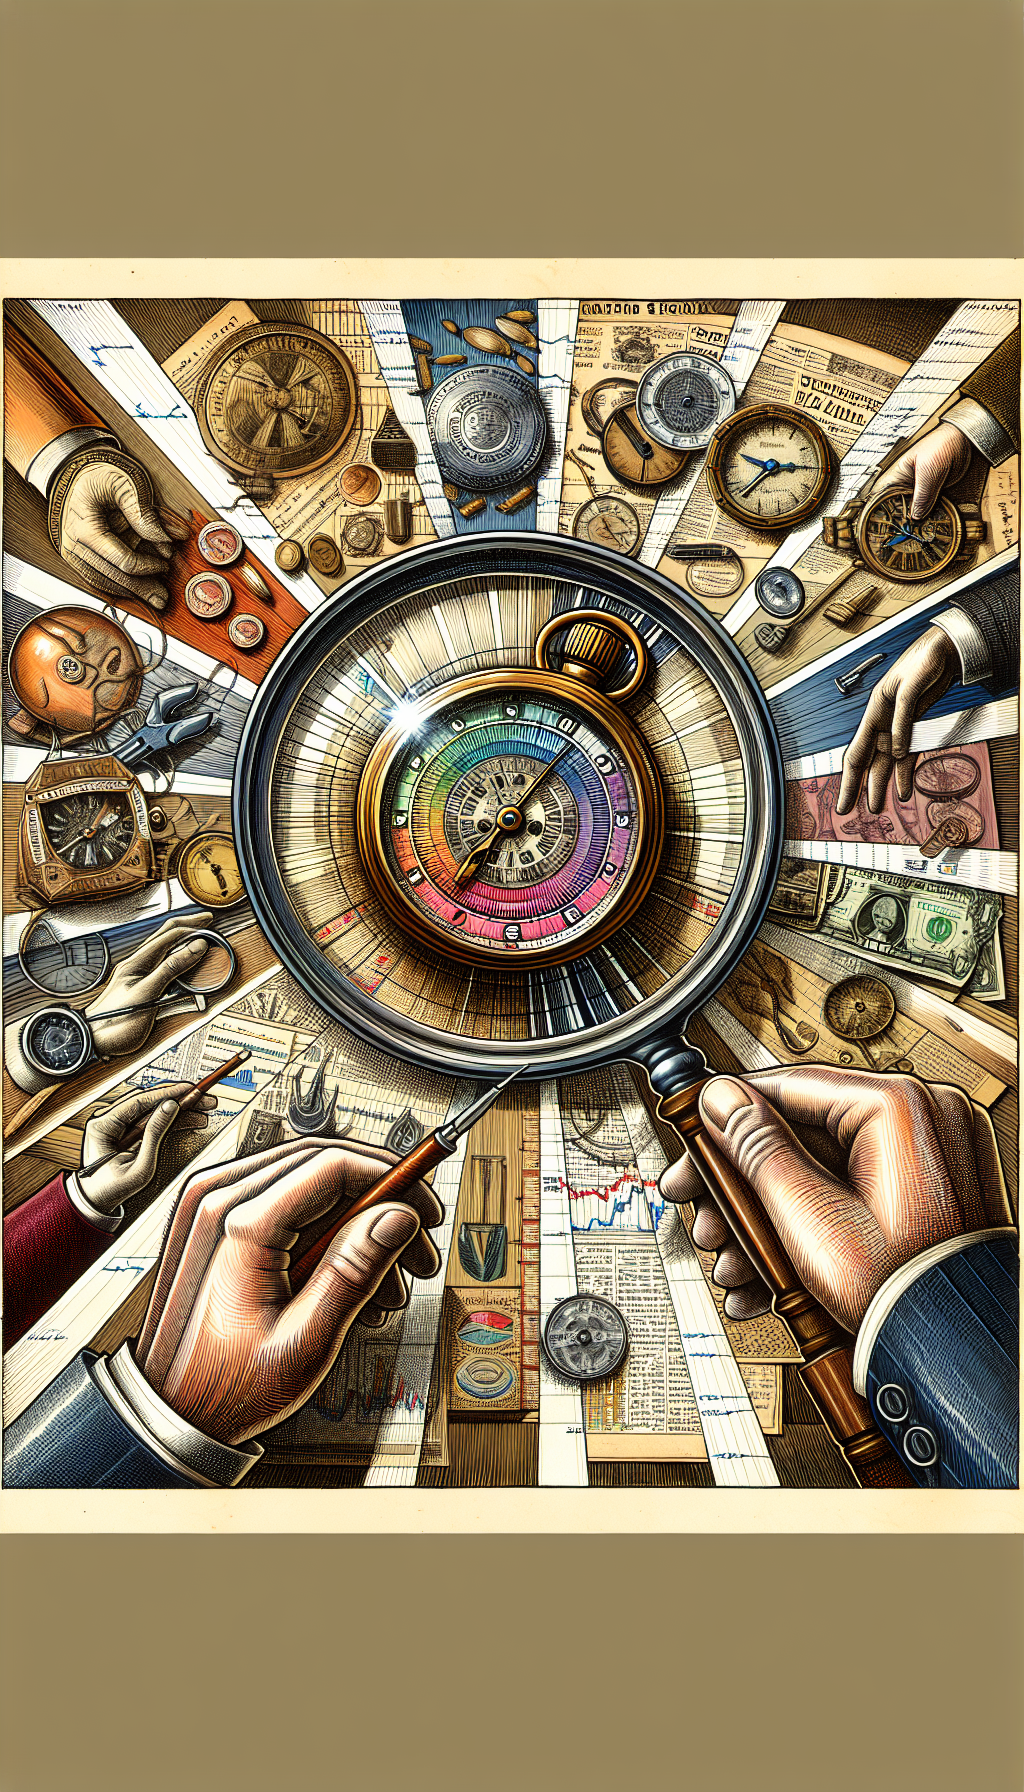 An illustration depicting a magnifying glass focused on a classic Pulsar watch, with rays emanating from the glass revealing different market factors like dollar signs, a calendar page from the '70s, a trend graph, and collector's hands. Each ray showcases a different drawing style: one in bold ink, another in watercolor, one in engraving style, and one in comic style.